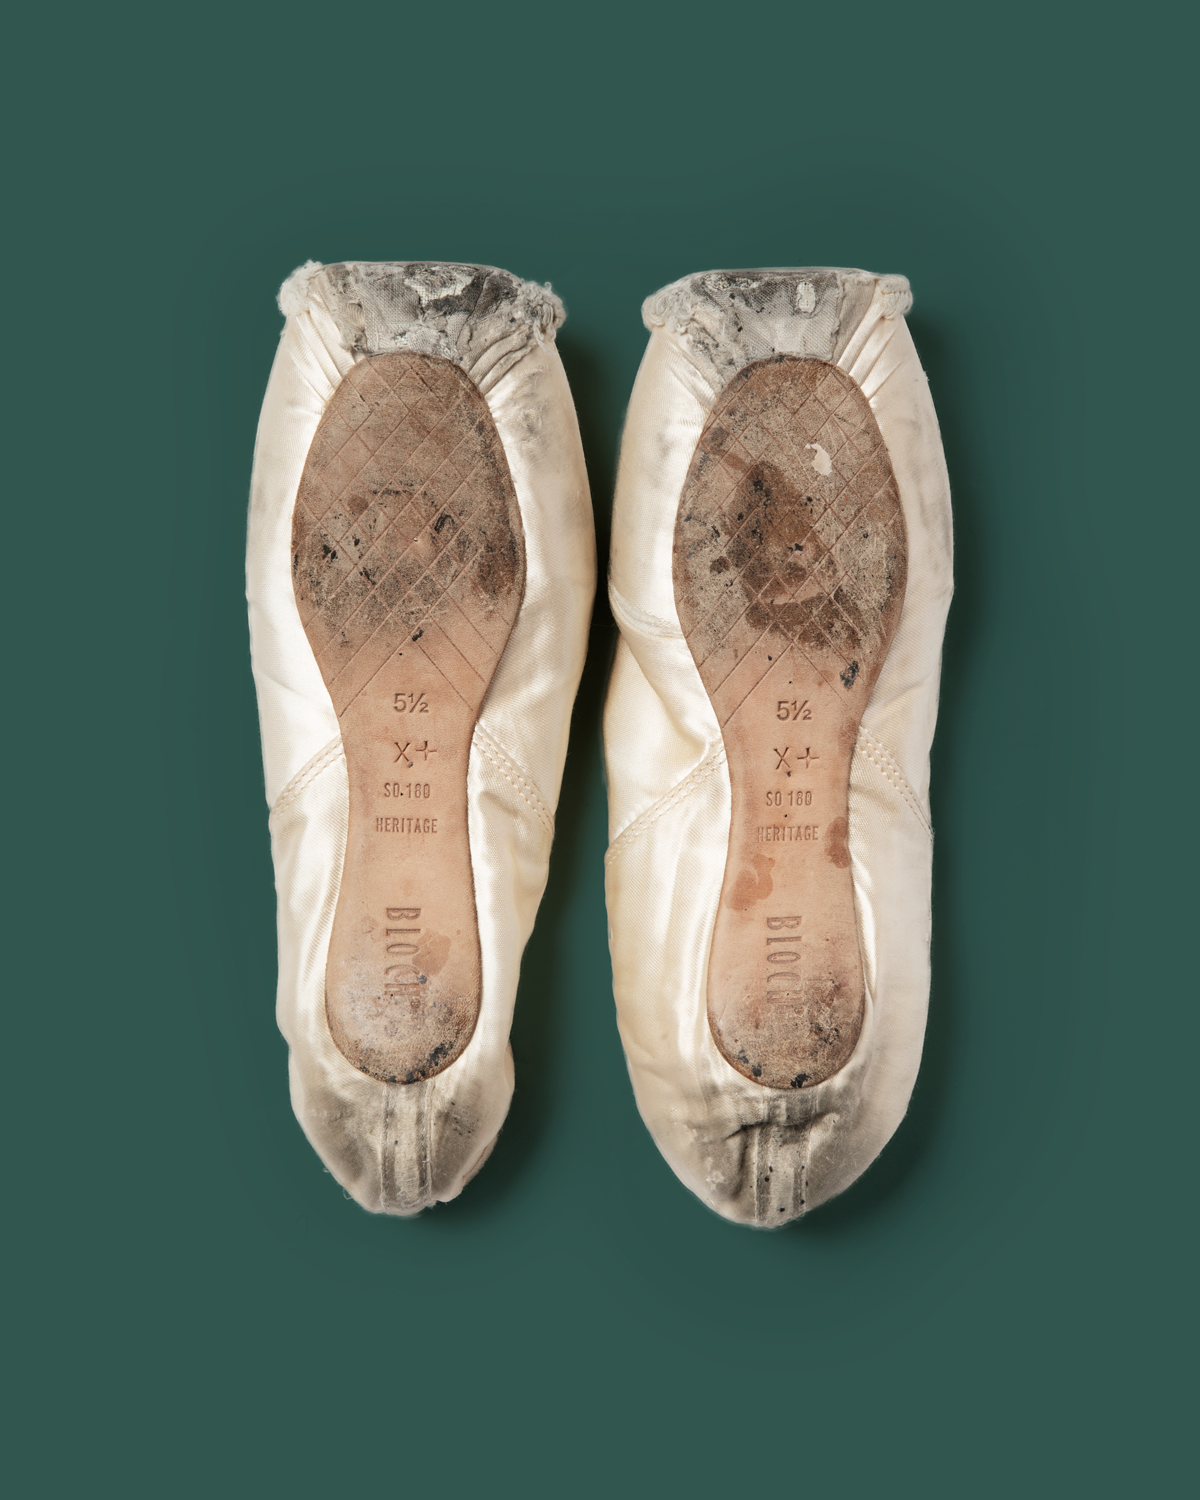 https://cdn.shopify.com/s/files/1/0100/8117/3585/files/used_pointe_shoes.png?v=1596421484